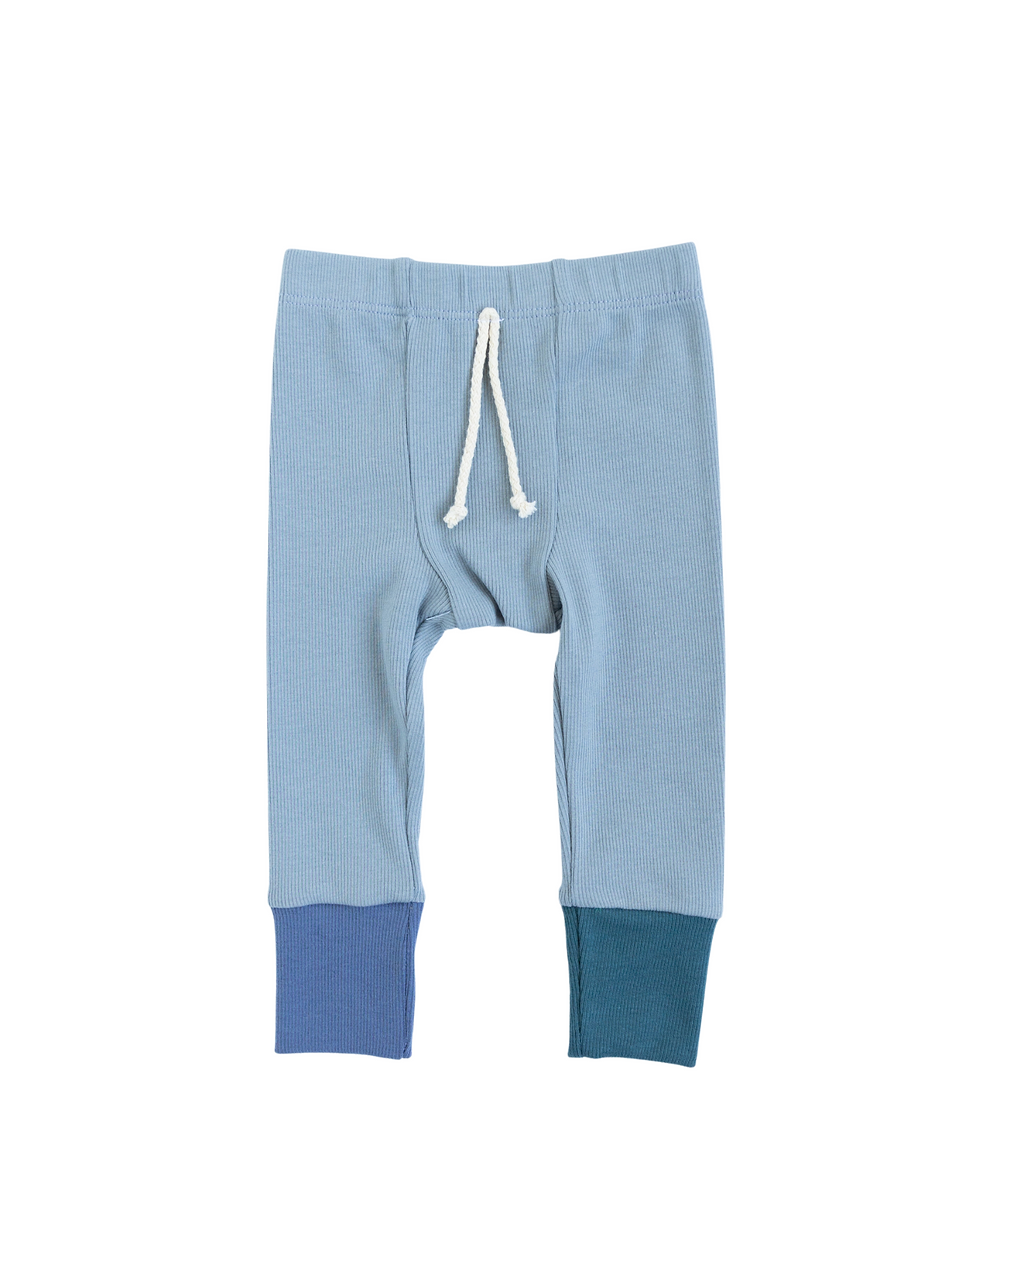 rib knit pant - whale ink blue and neptune